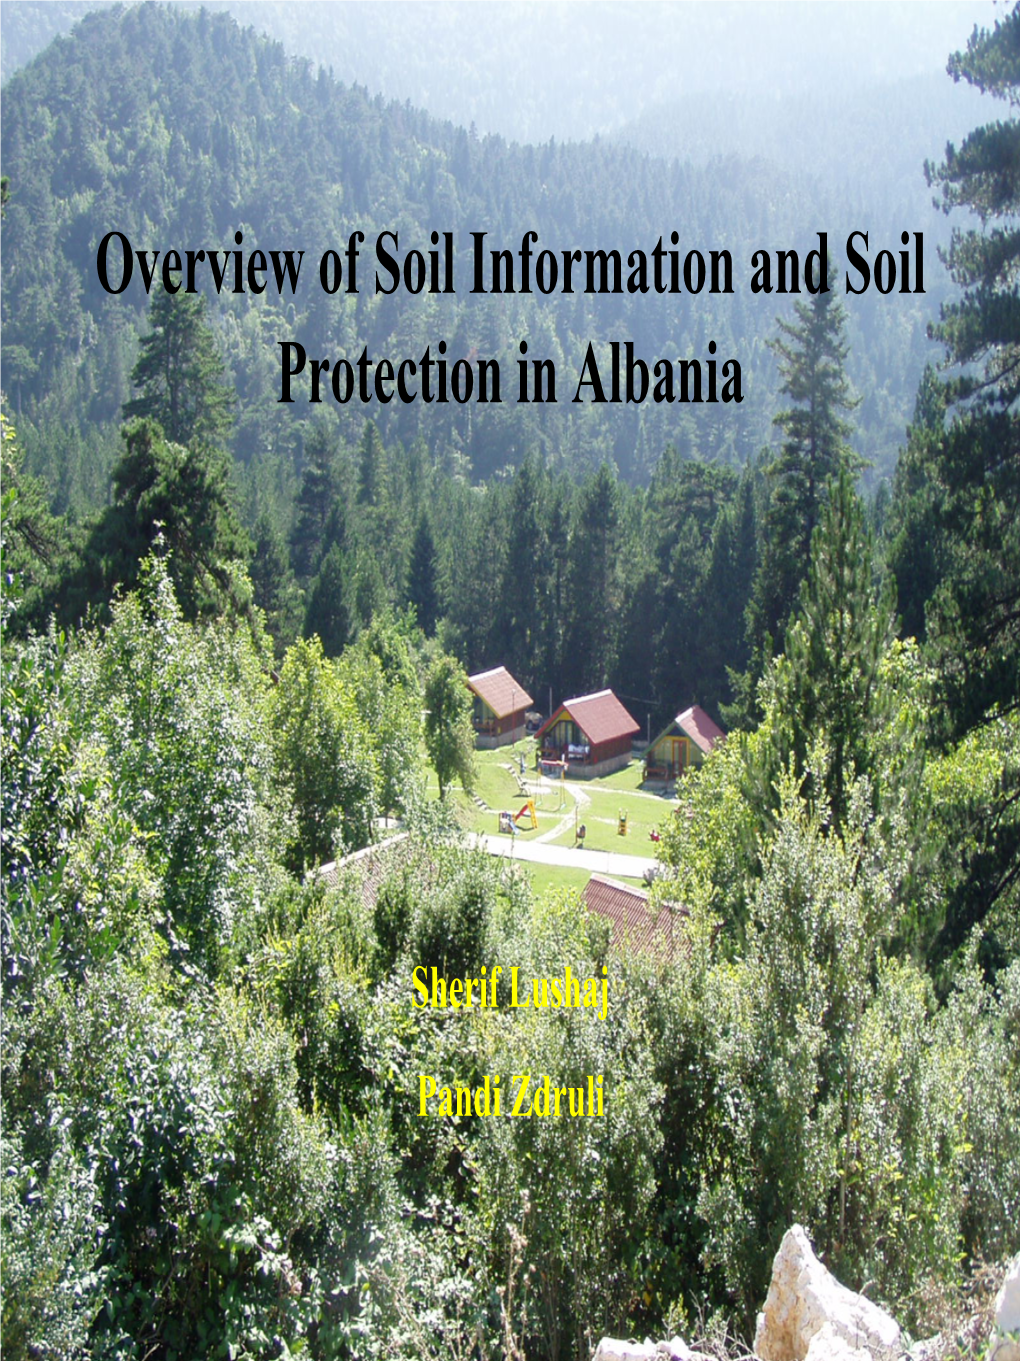 Overview of Soil Information and Soil Protection in Albania